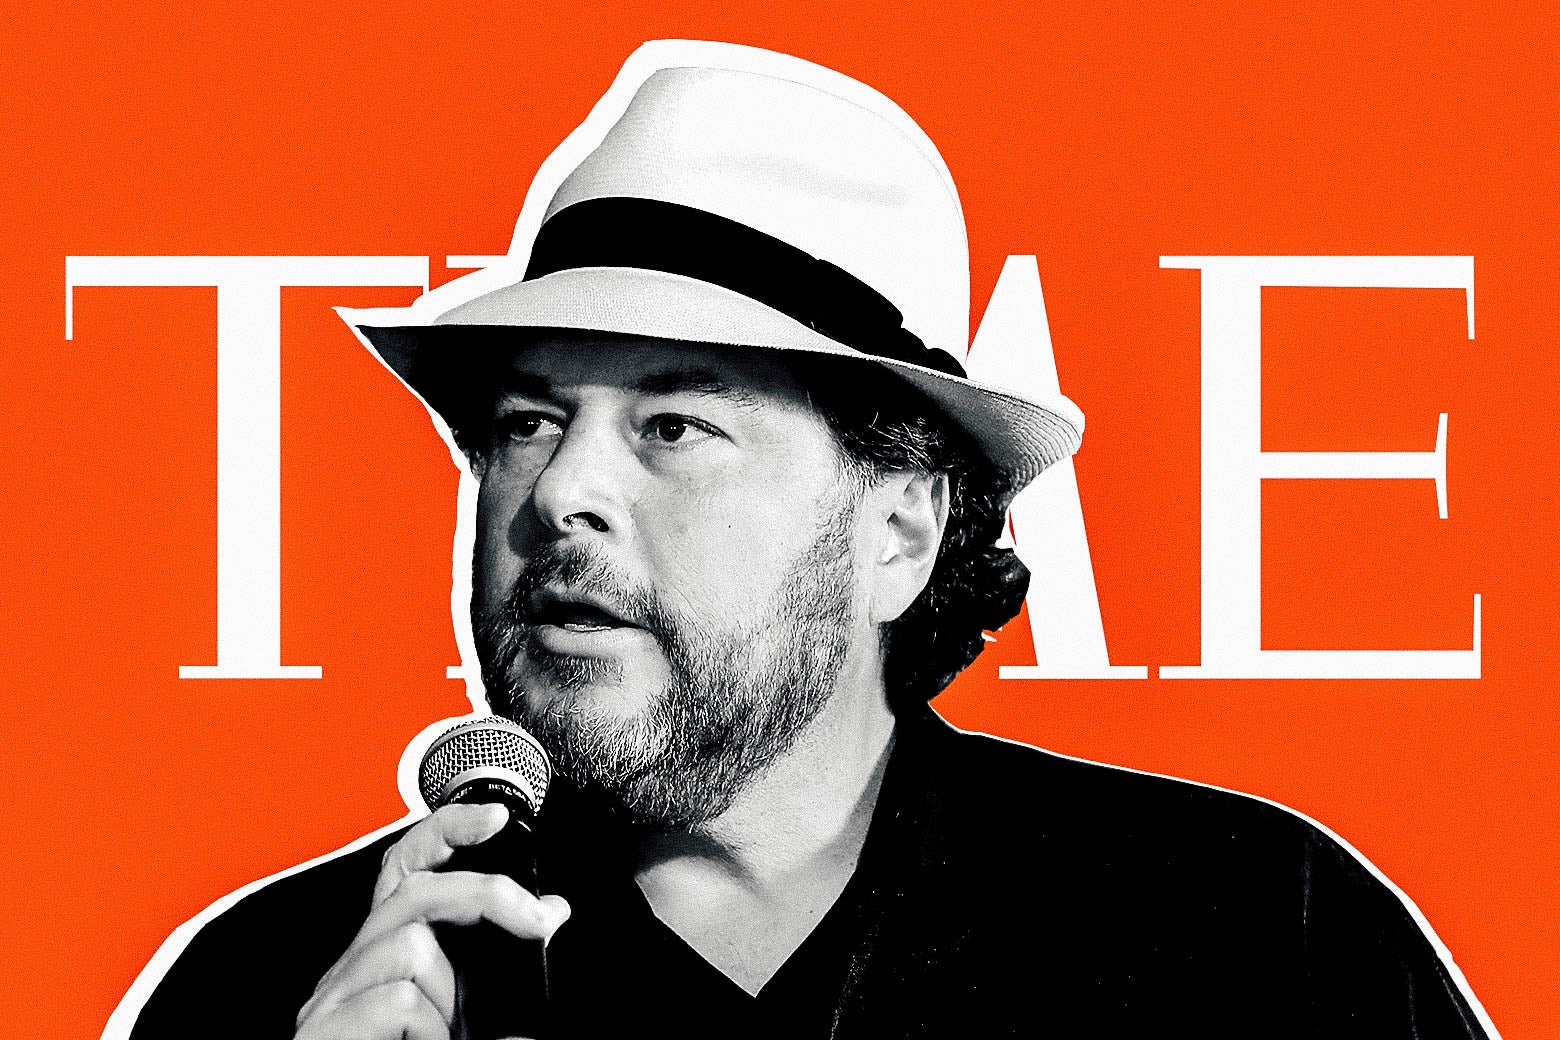 Marc Benioff, with a hat on, in front of the Time logo.